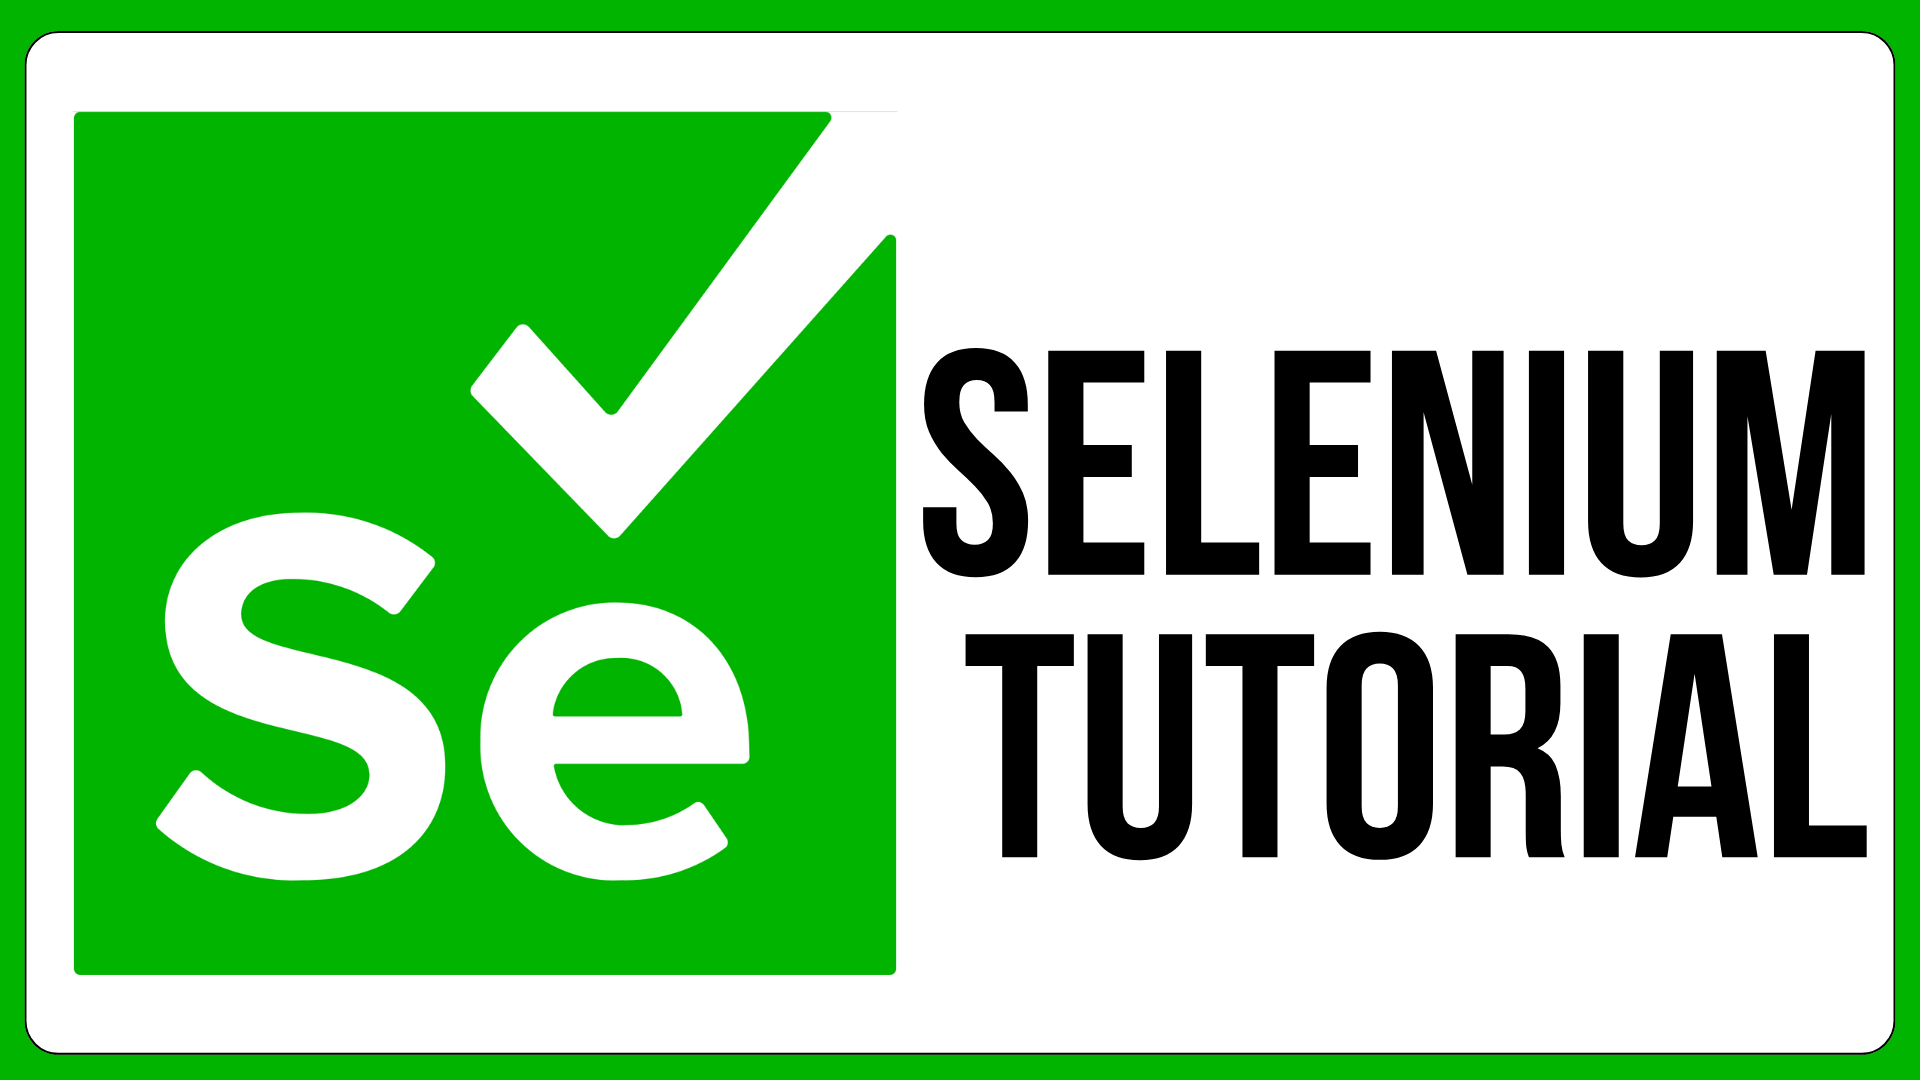 Selenium WebDriver is the Easiest-to-Learn Web Test Automation Framework |  by Zhimin Zhan | Medium